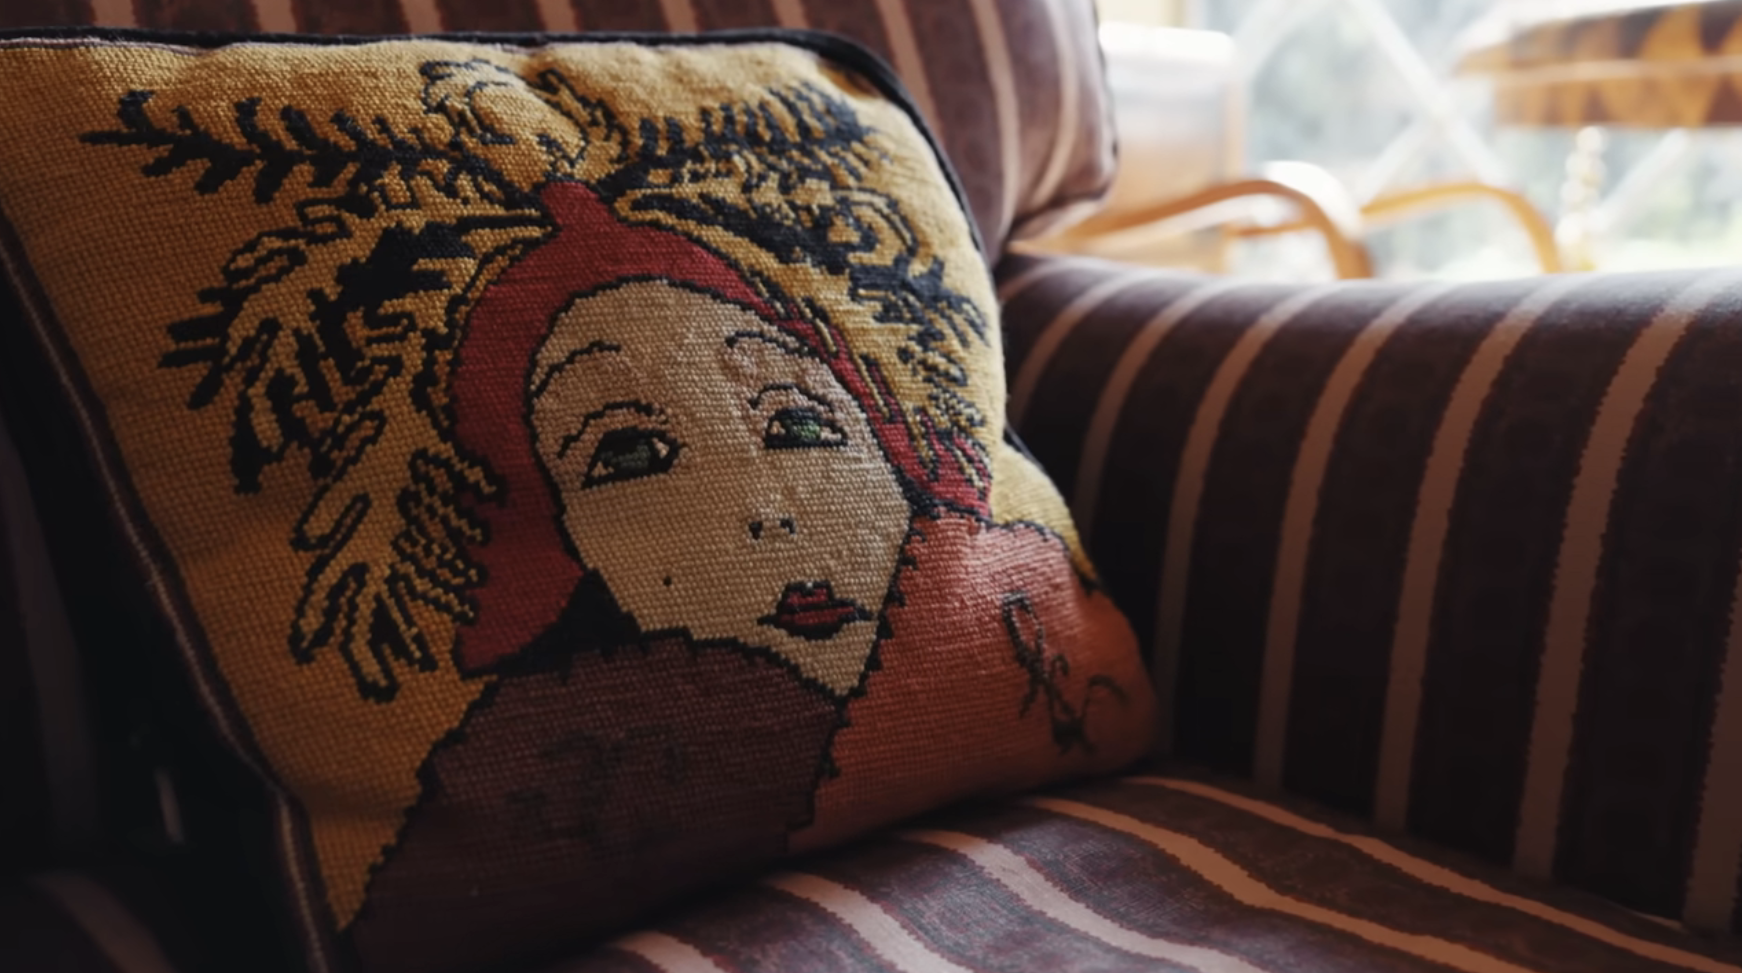 Embroidered cushion with a stylized female face on a striped sofa